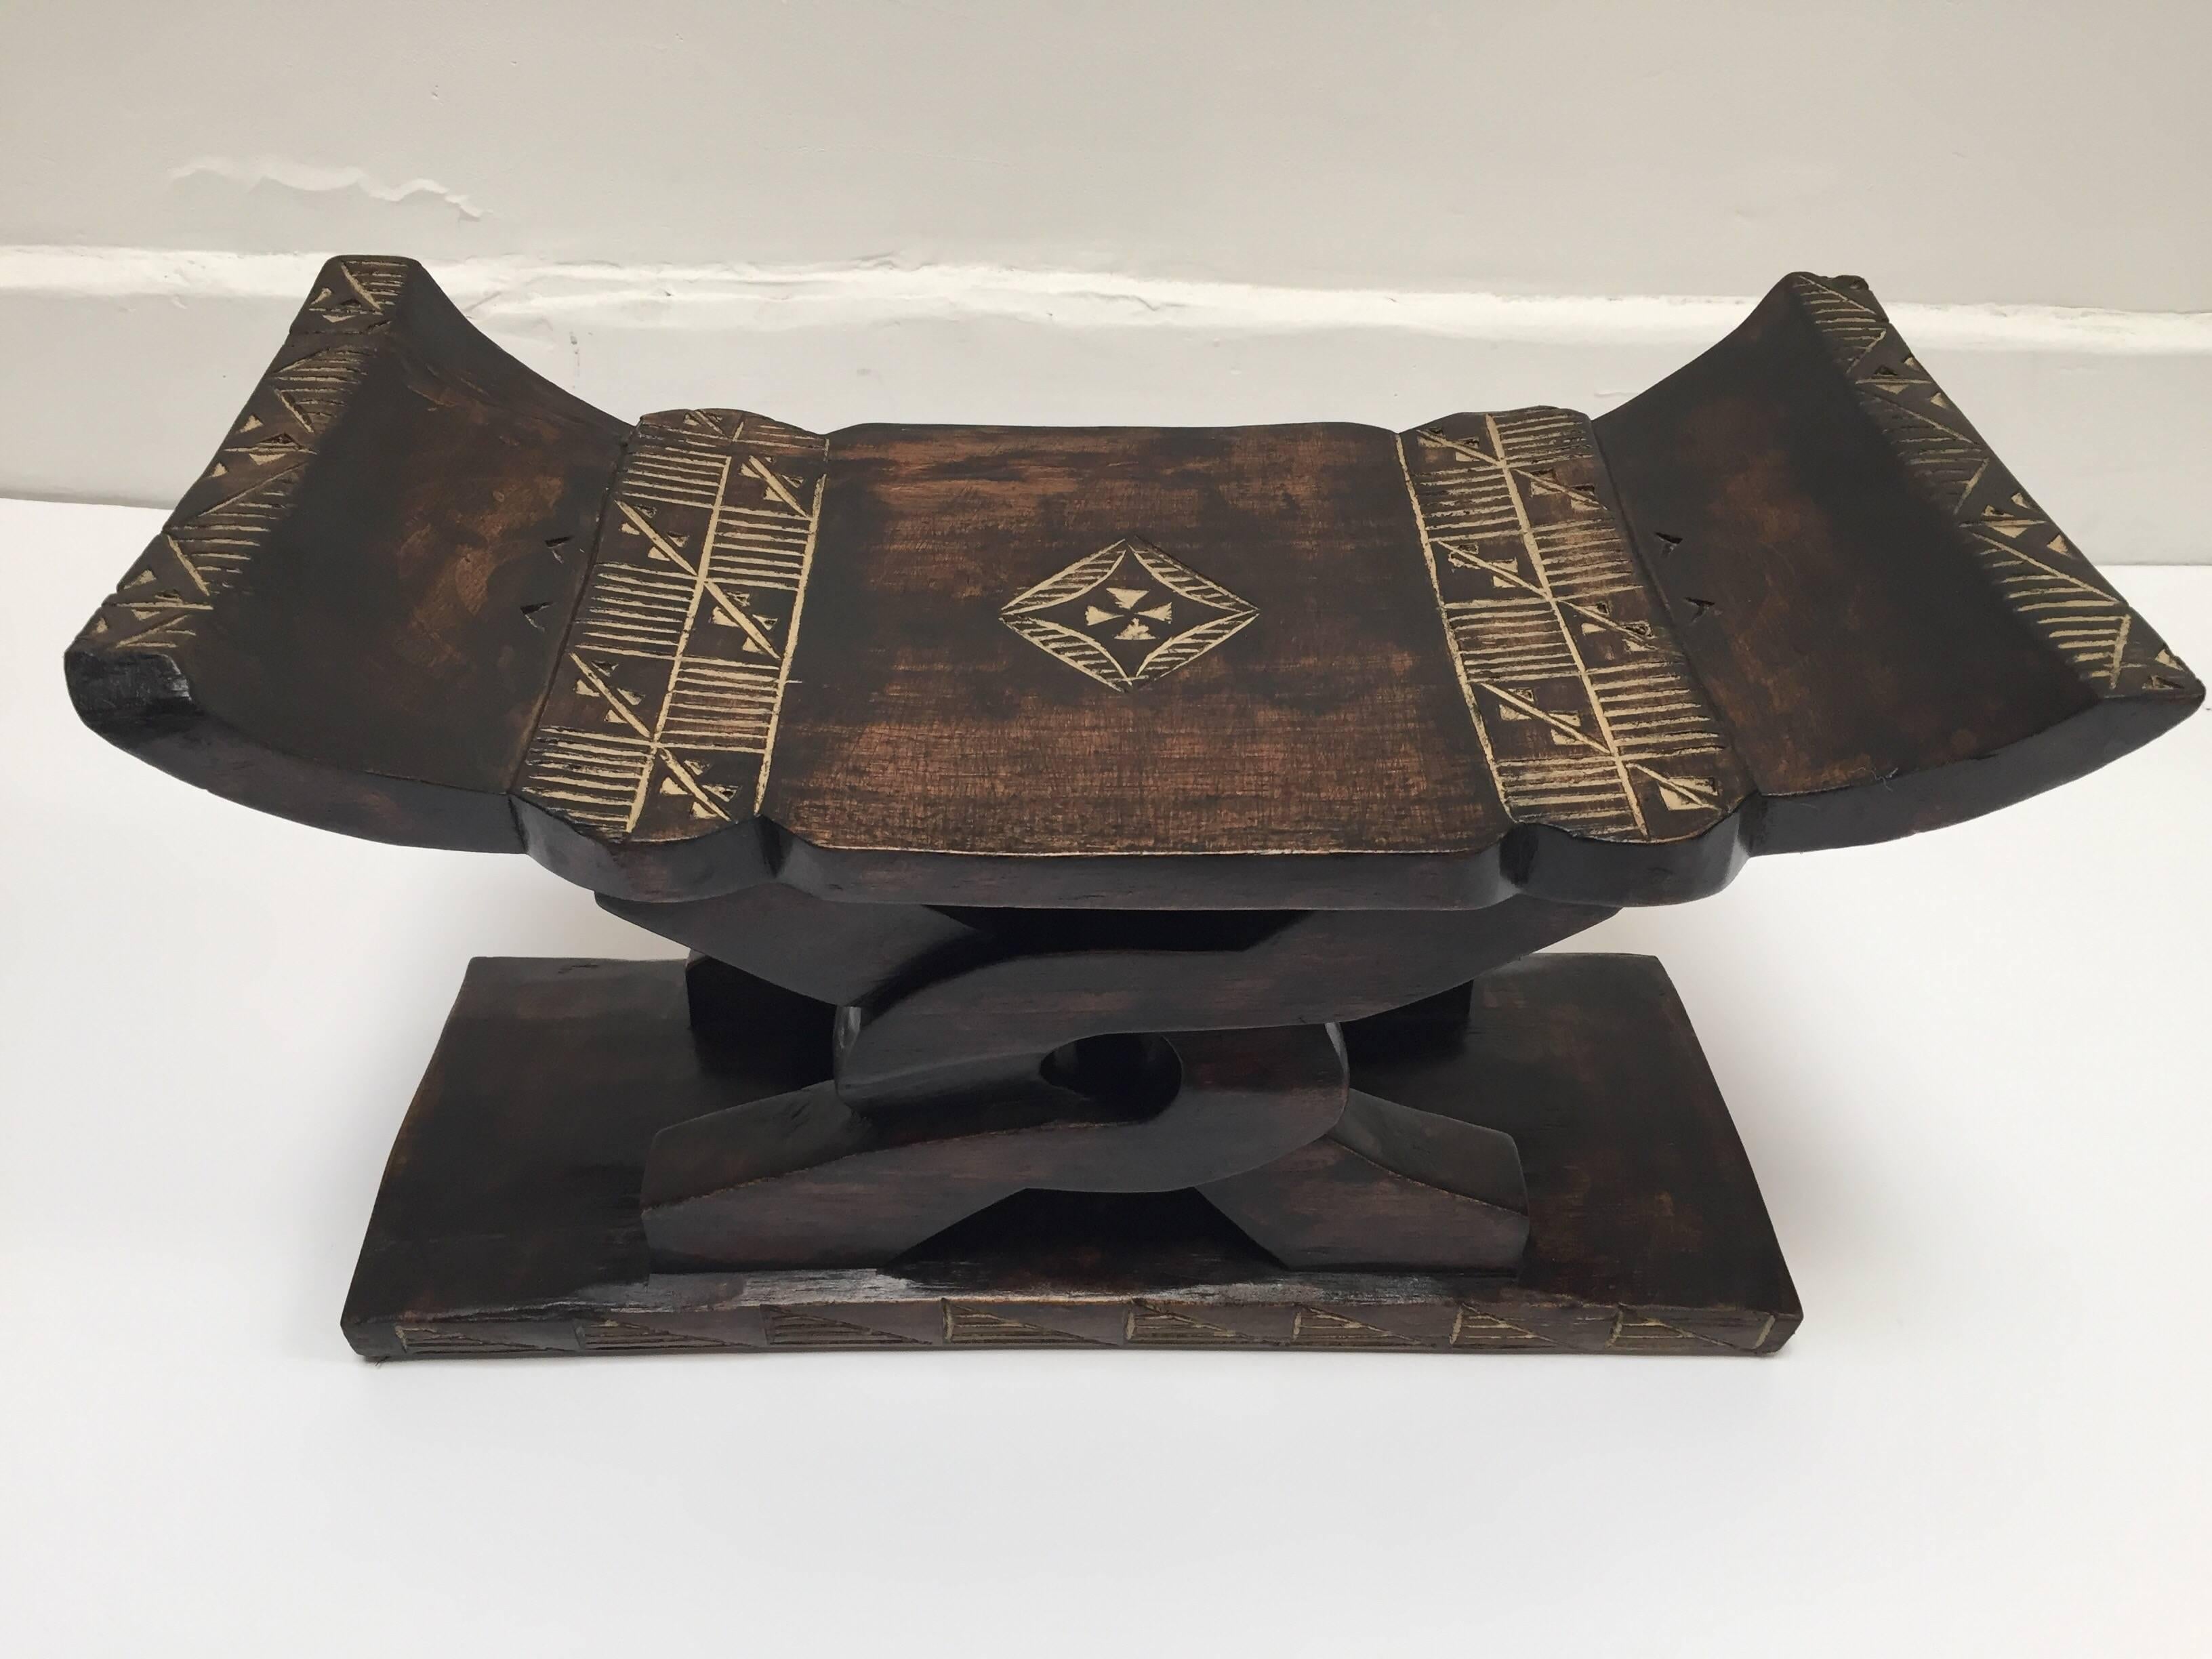 African handcrafted stool with geometric designs. 
Hand-carved African wood with a curved seat raised on a carved wooden support with a slim plinth base. 
Africa, Ghana, circa 1980.
Could be used as a side table or stool.